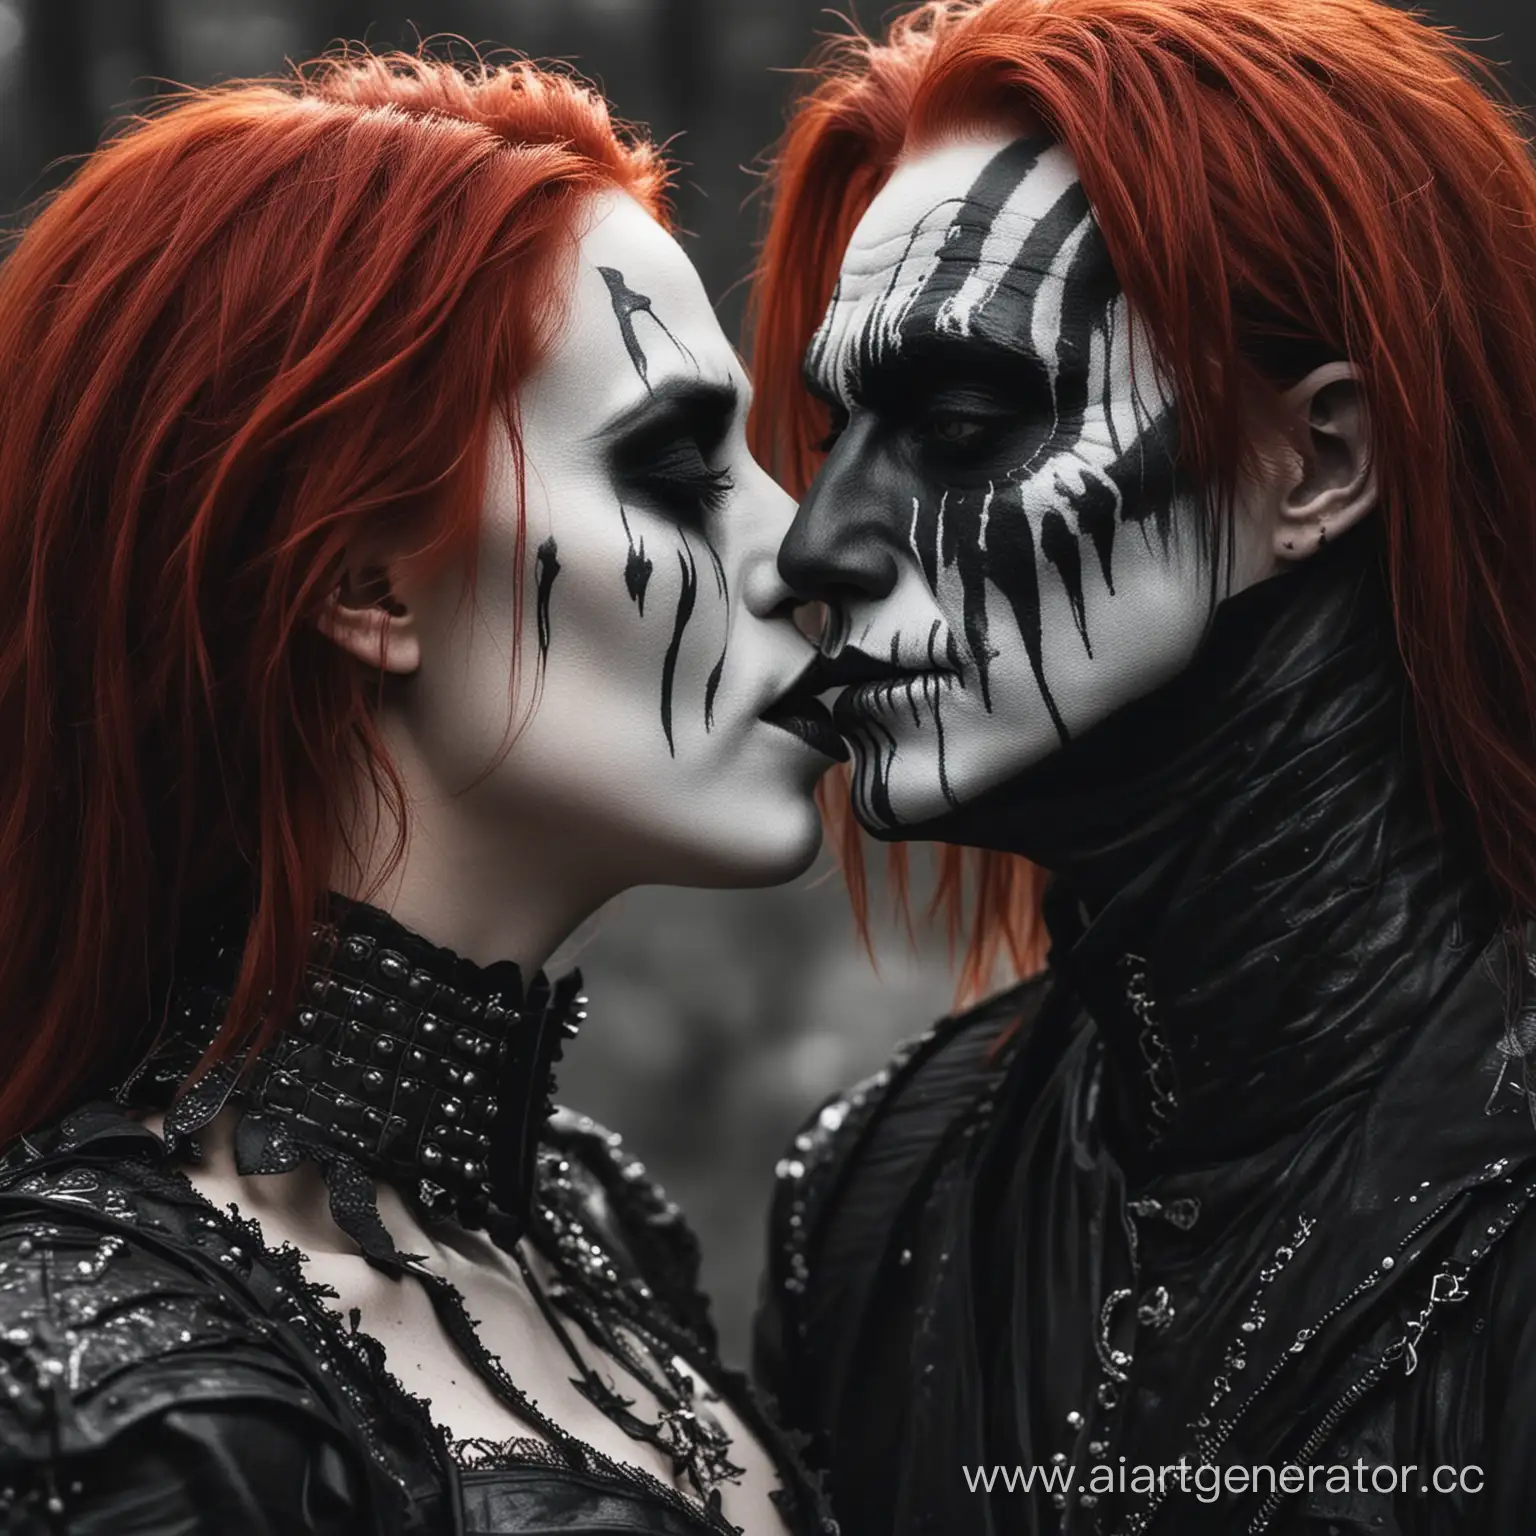 Metalist-in-Corpse-Paint-Kissing-RedHaired-Woman